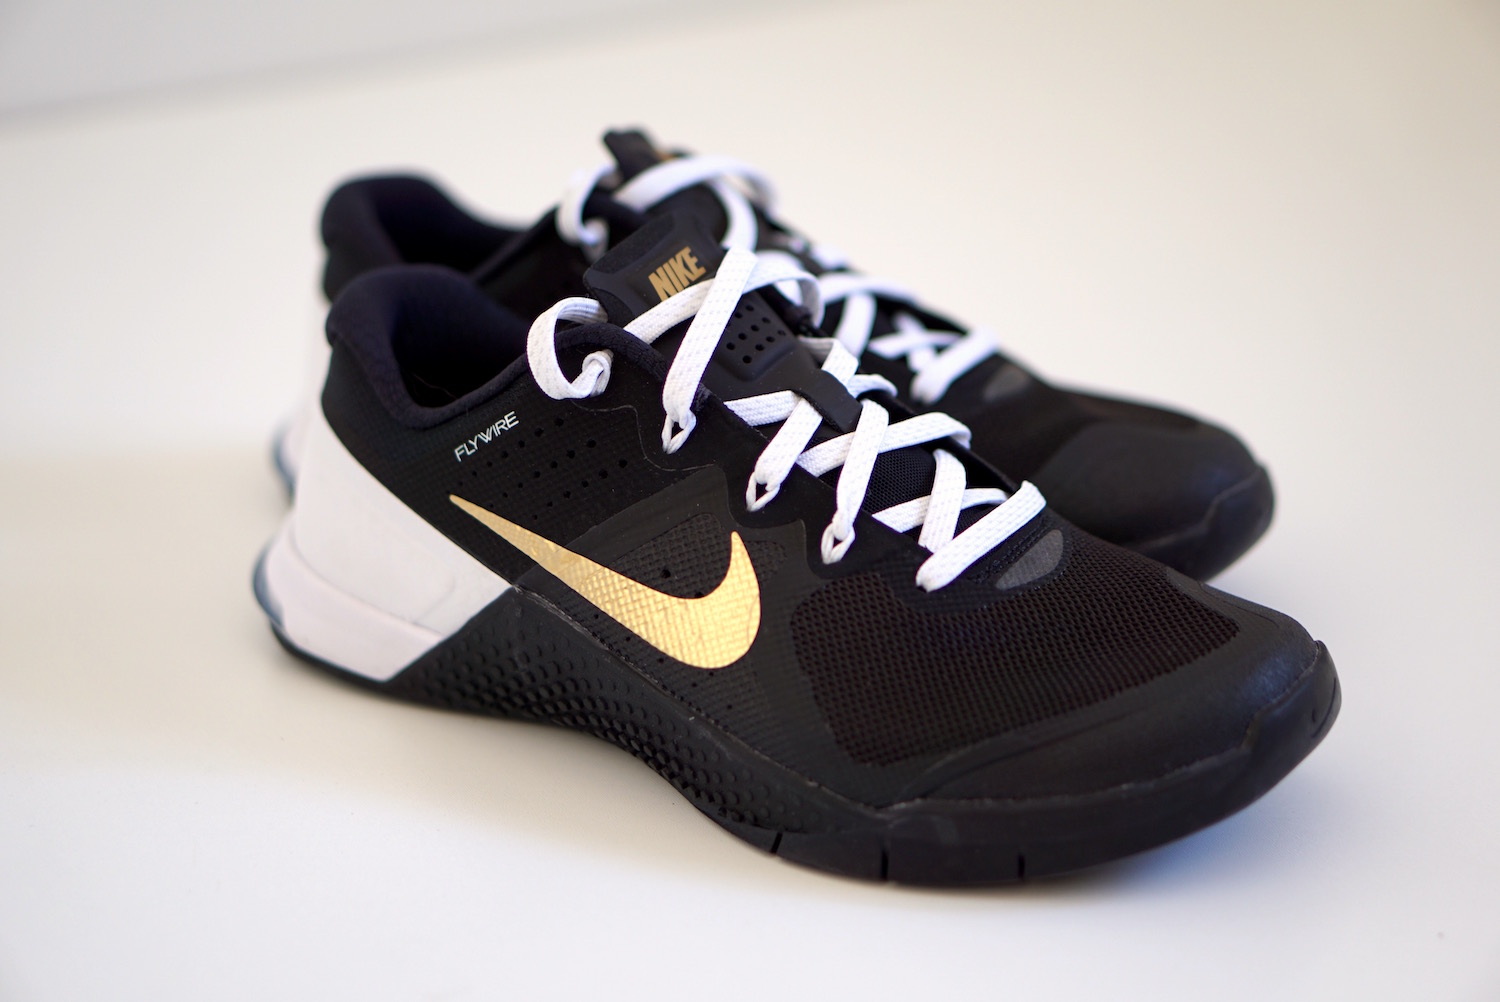 nike metcon gold and black